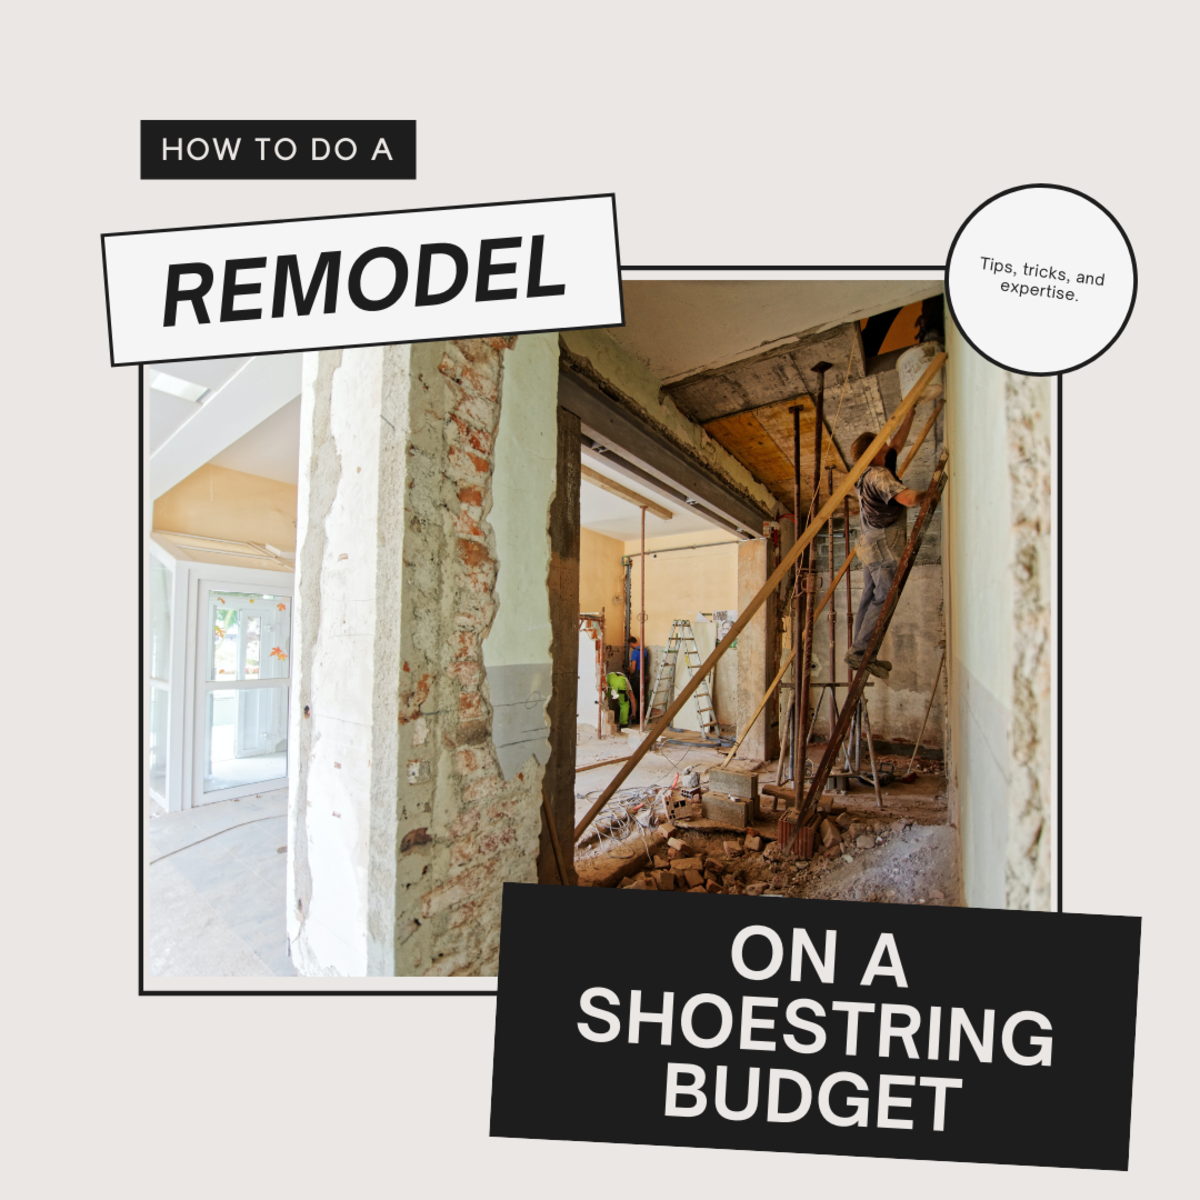 How to Remodel on a Shoestring Budget.